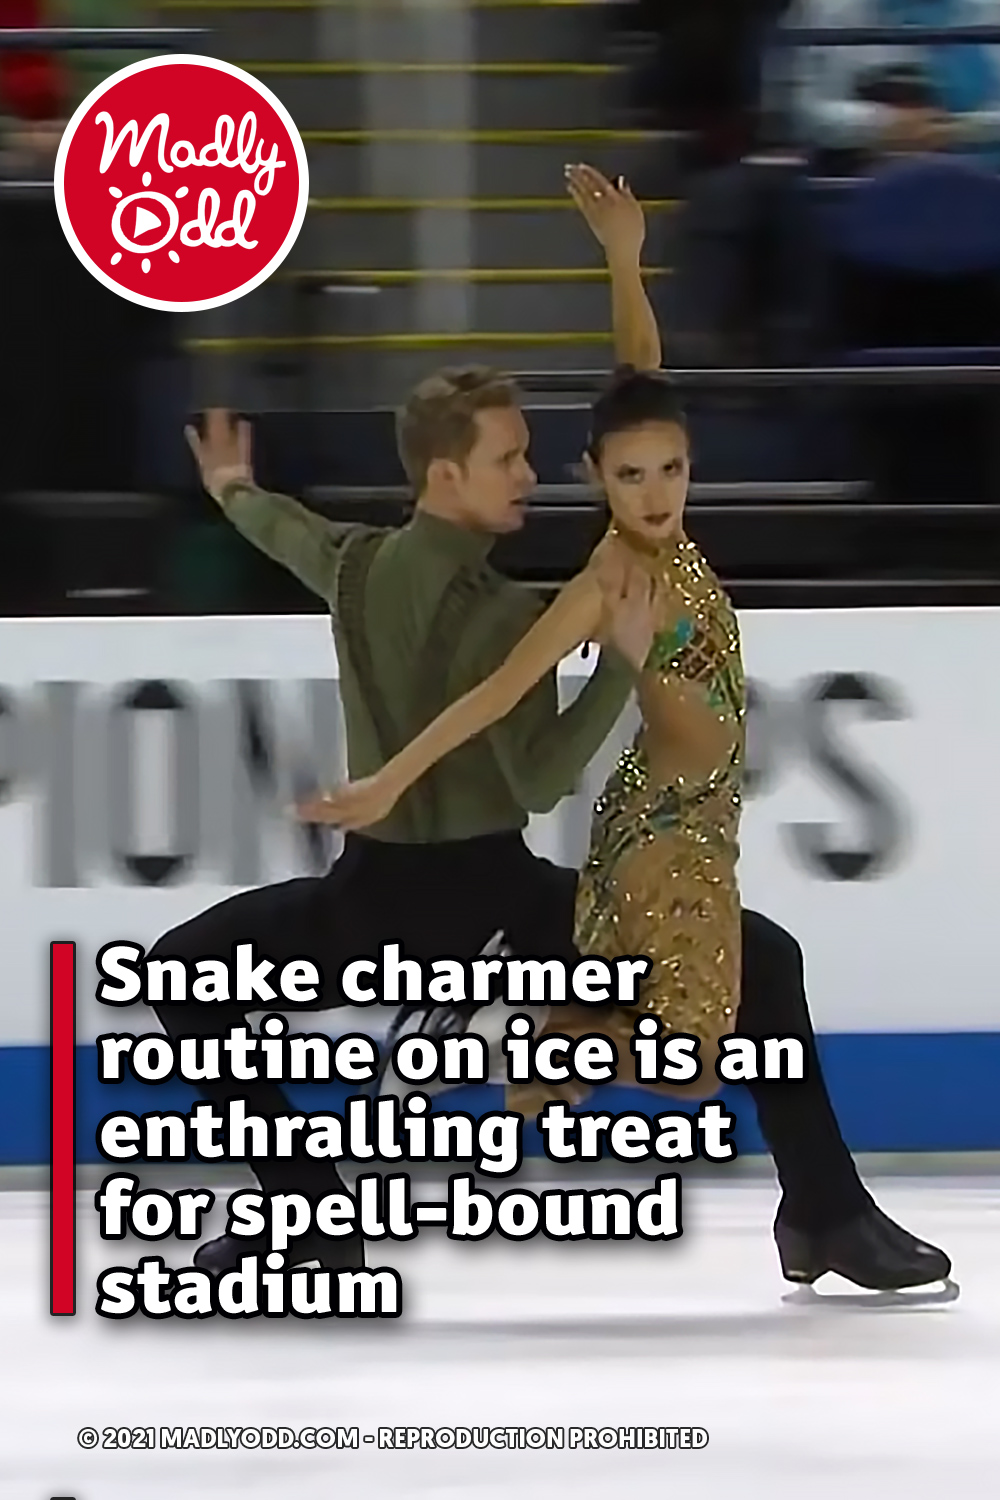 Snake charmer routine on ice is an enthralling treat for spell-bound stadium